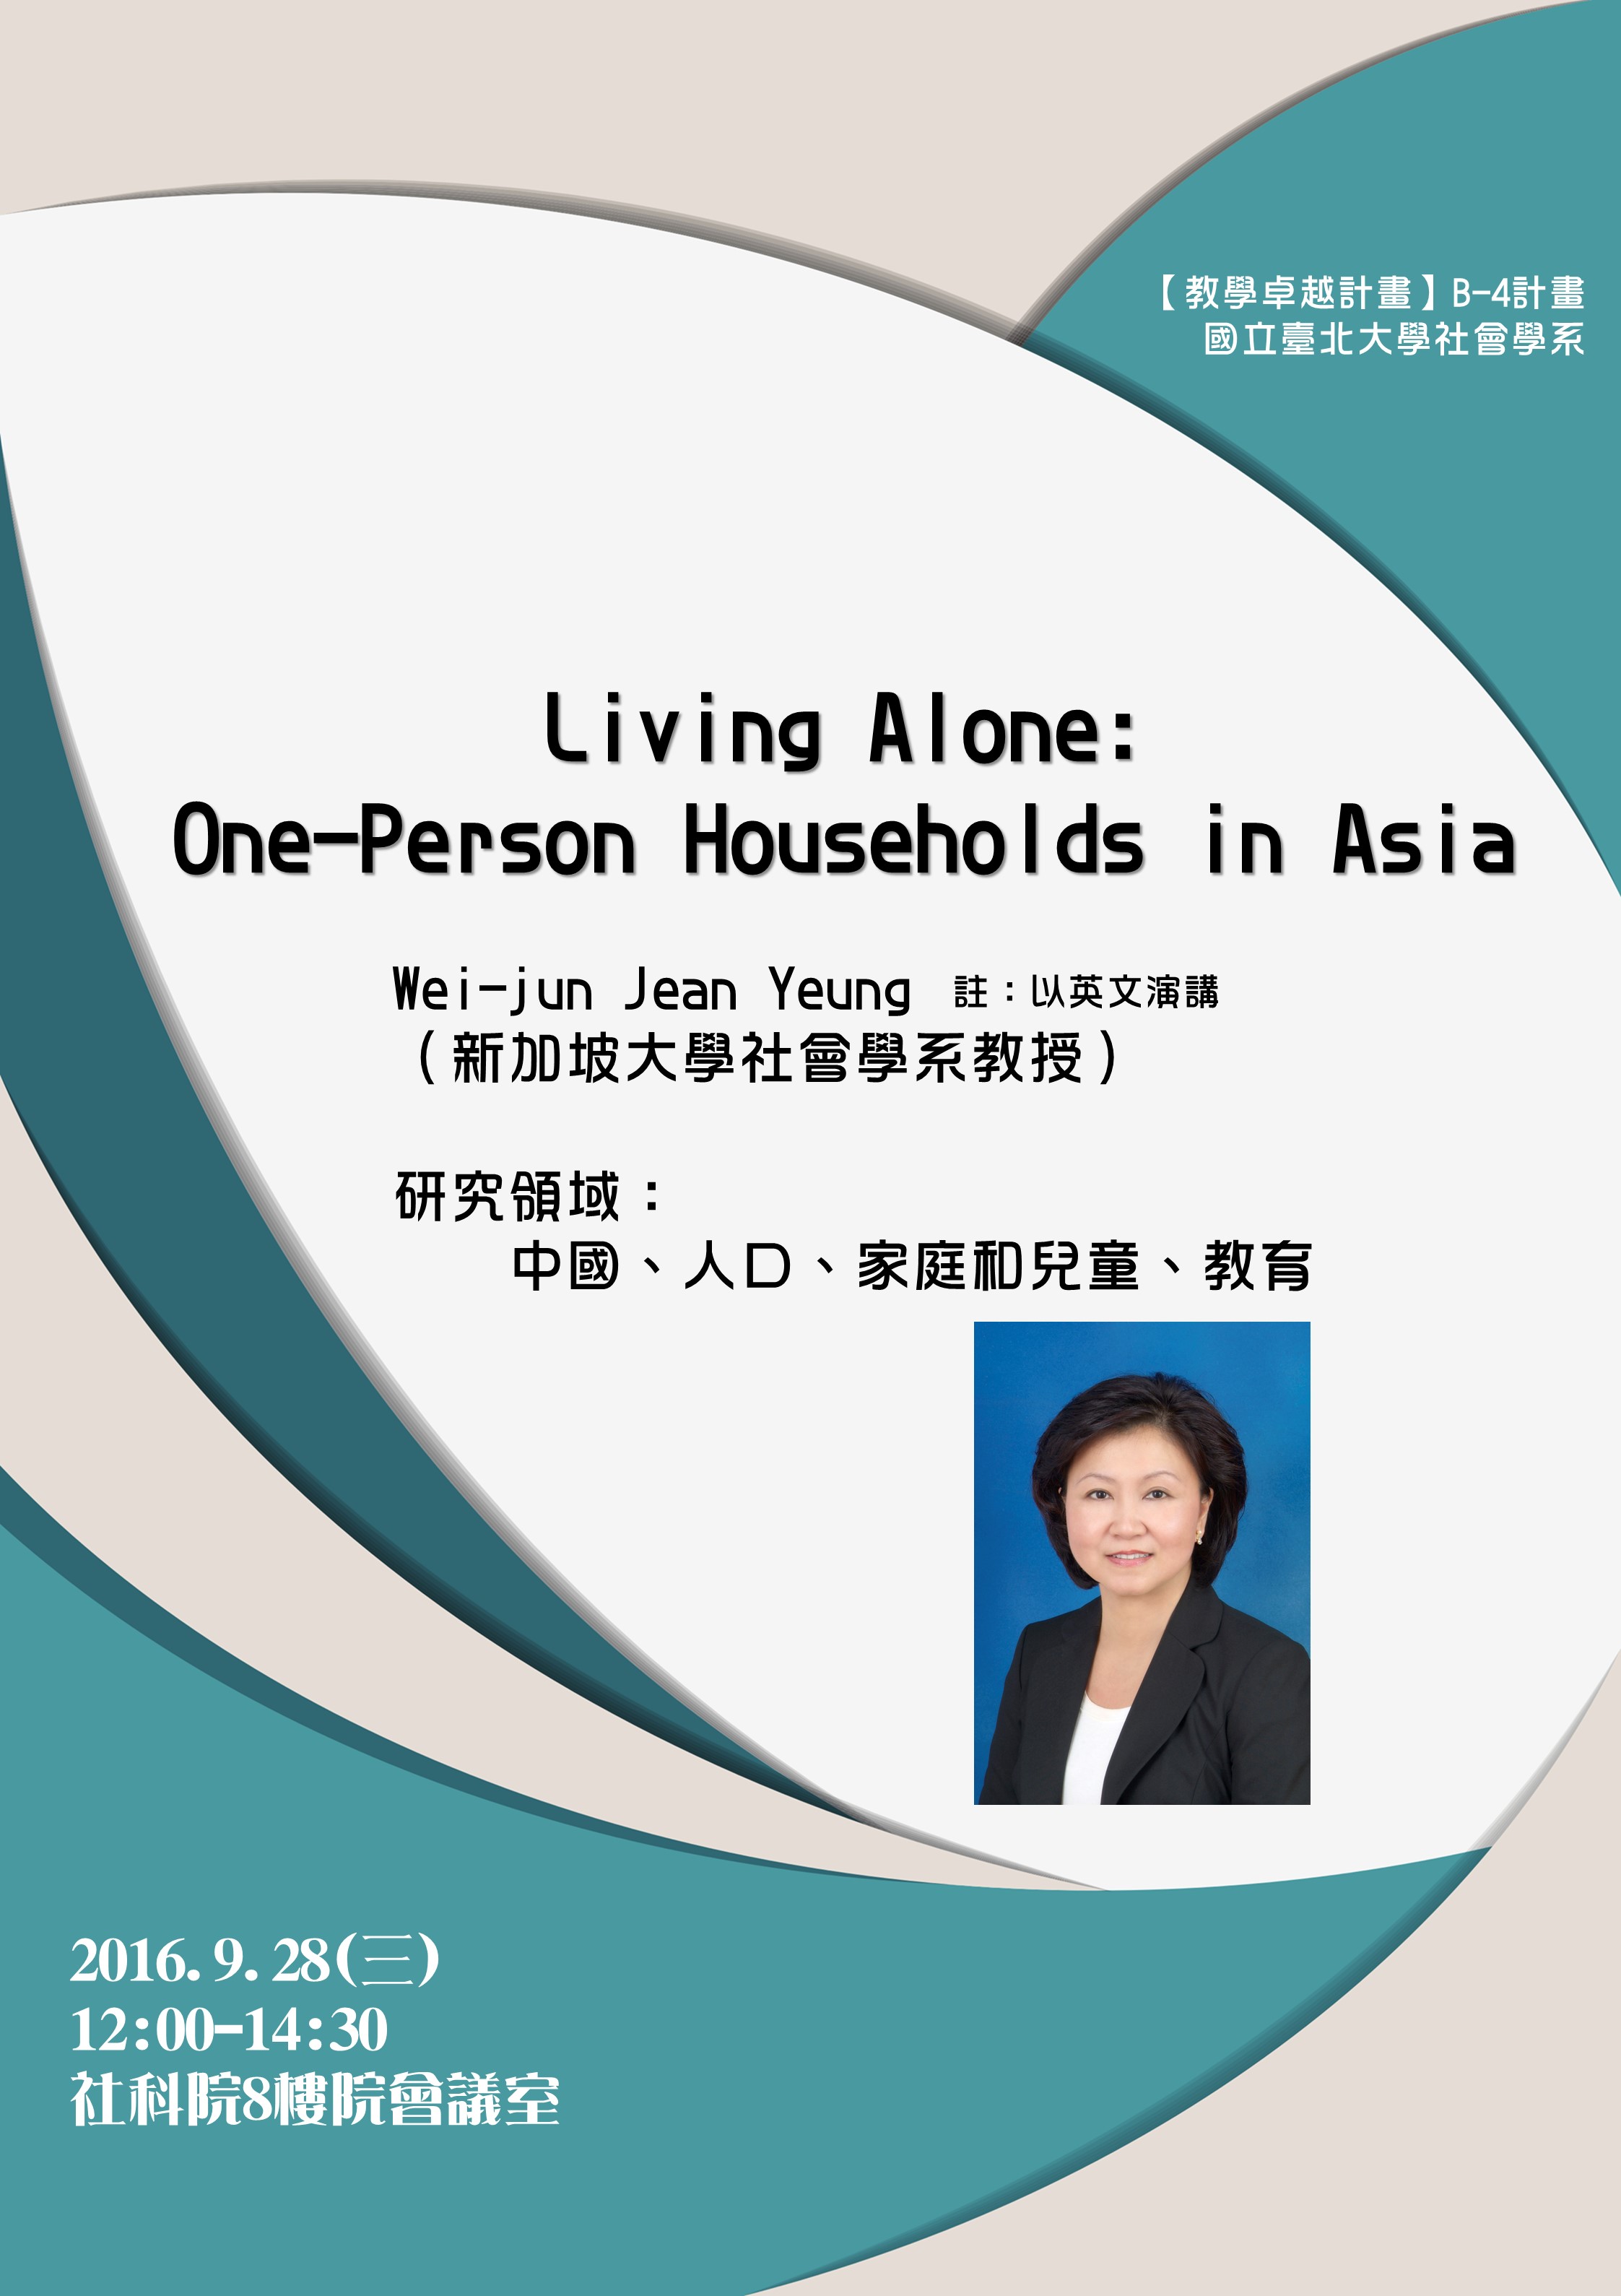  One-Person Households in Asia